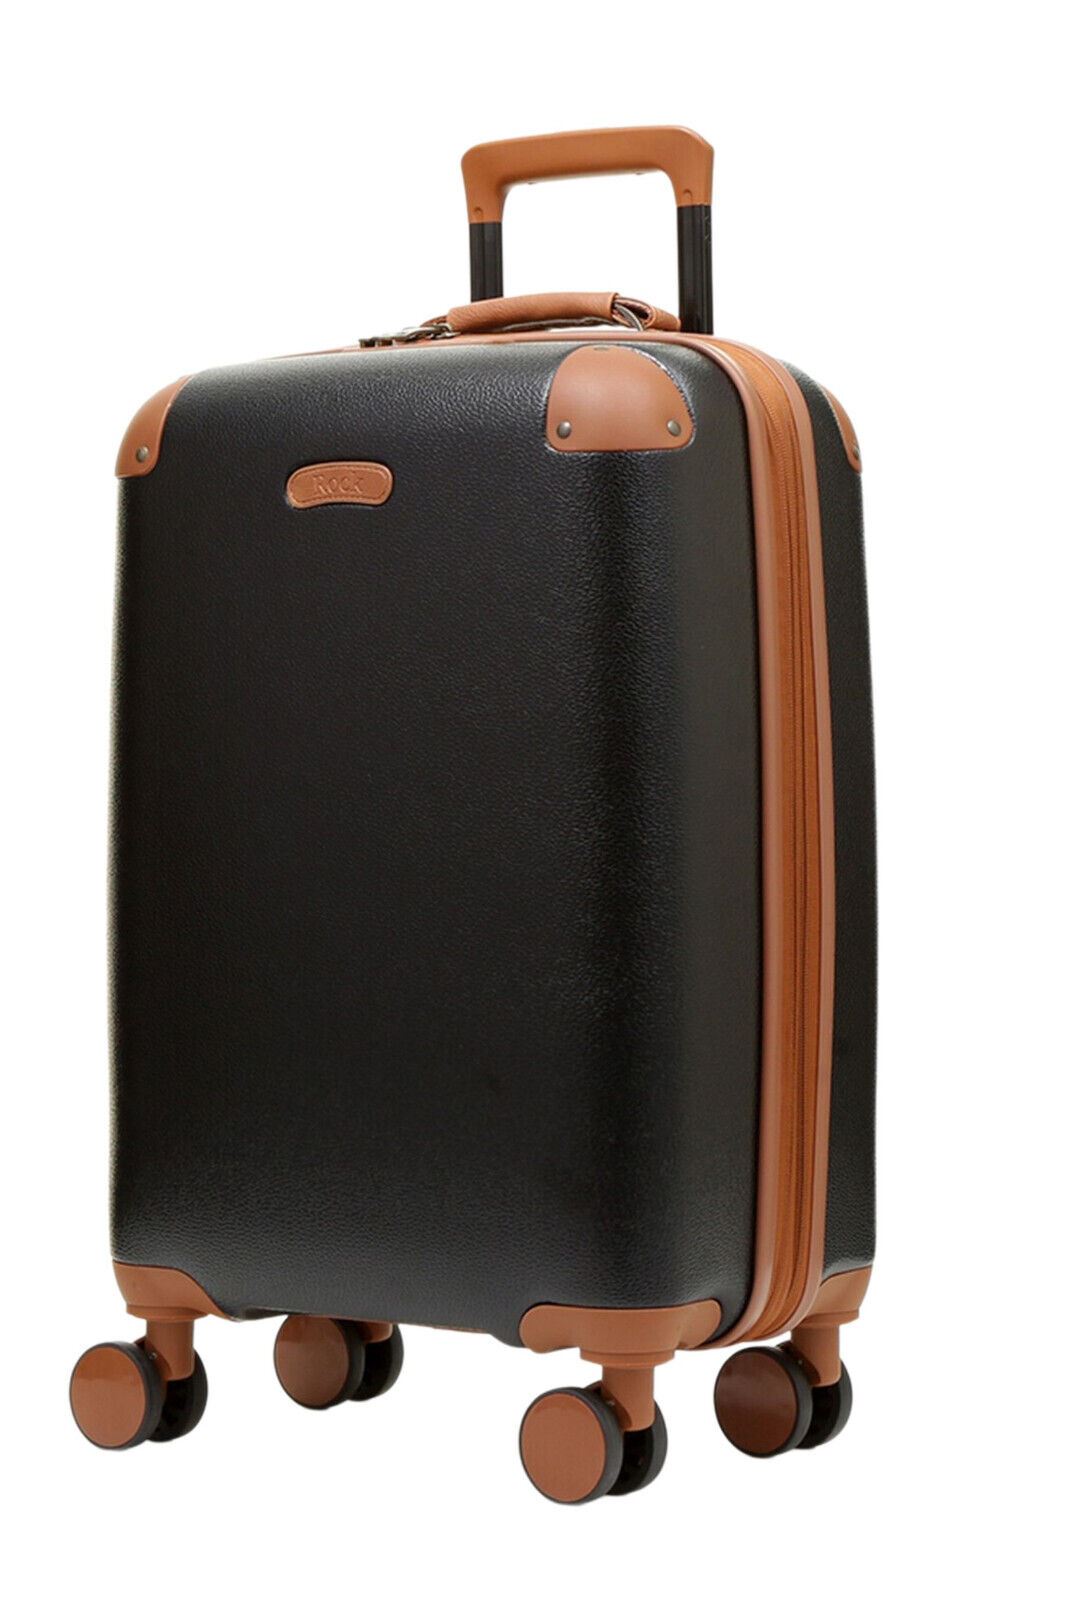 Hard Shell Classic Suitcase 4 Wheel Cabin Luggage Trolley Travel Bag - Upperclass Fashions 